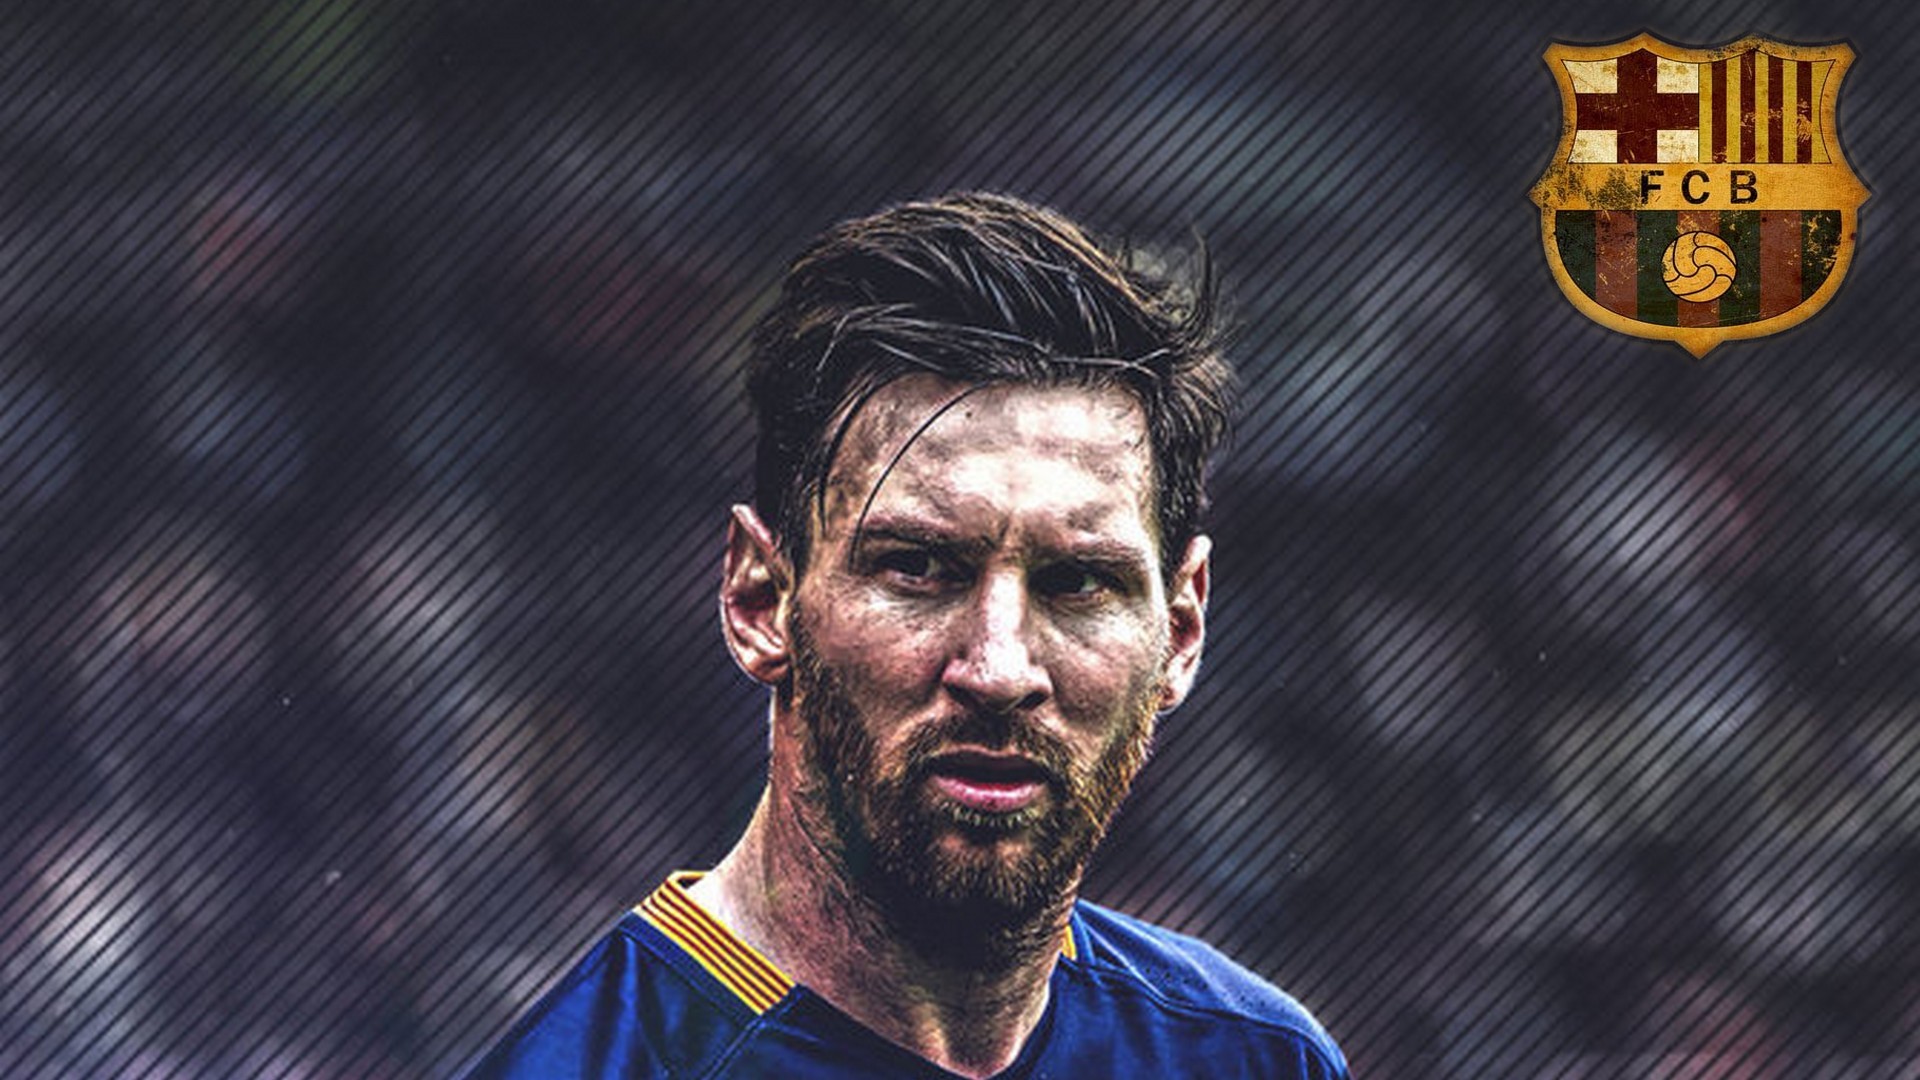 HD Leo Messi Backgrounds With Resolution 1920X1080 pixel. You can make this wallpaper for your Mac or Windows Desktop Background, iPhone, Android or Tablet and another Smartphone device for free